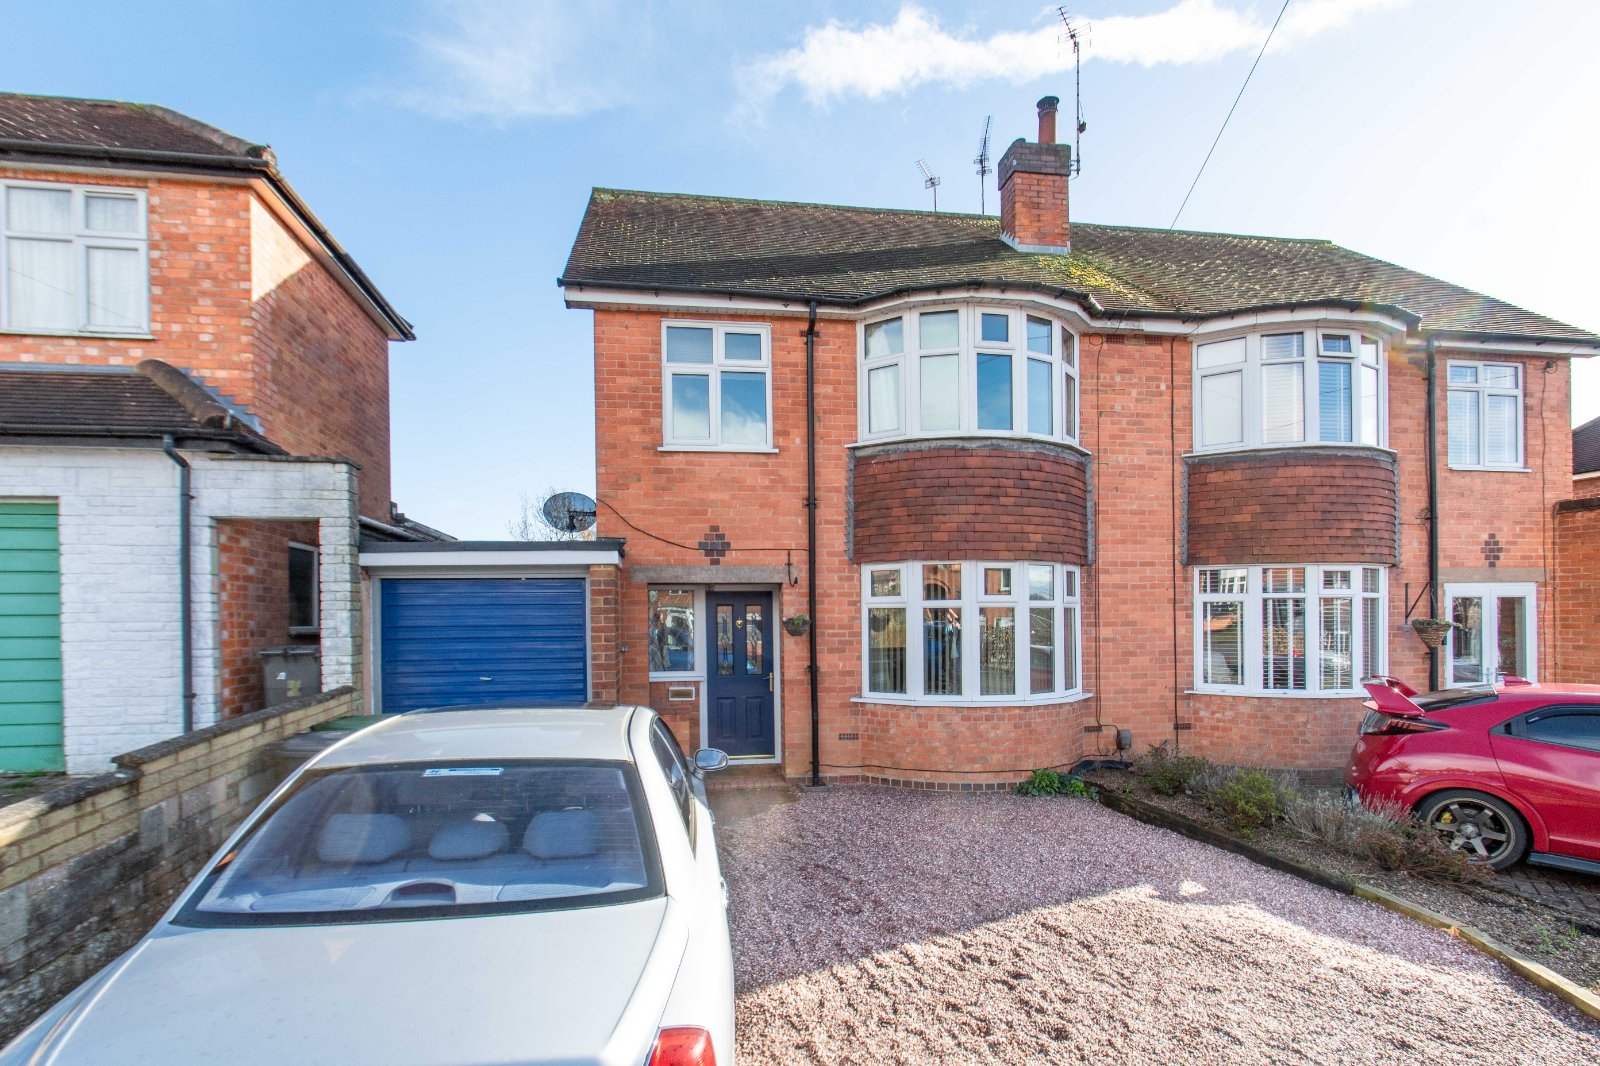 3 bed house for sale in Yvonne Road, Redditch 3